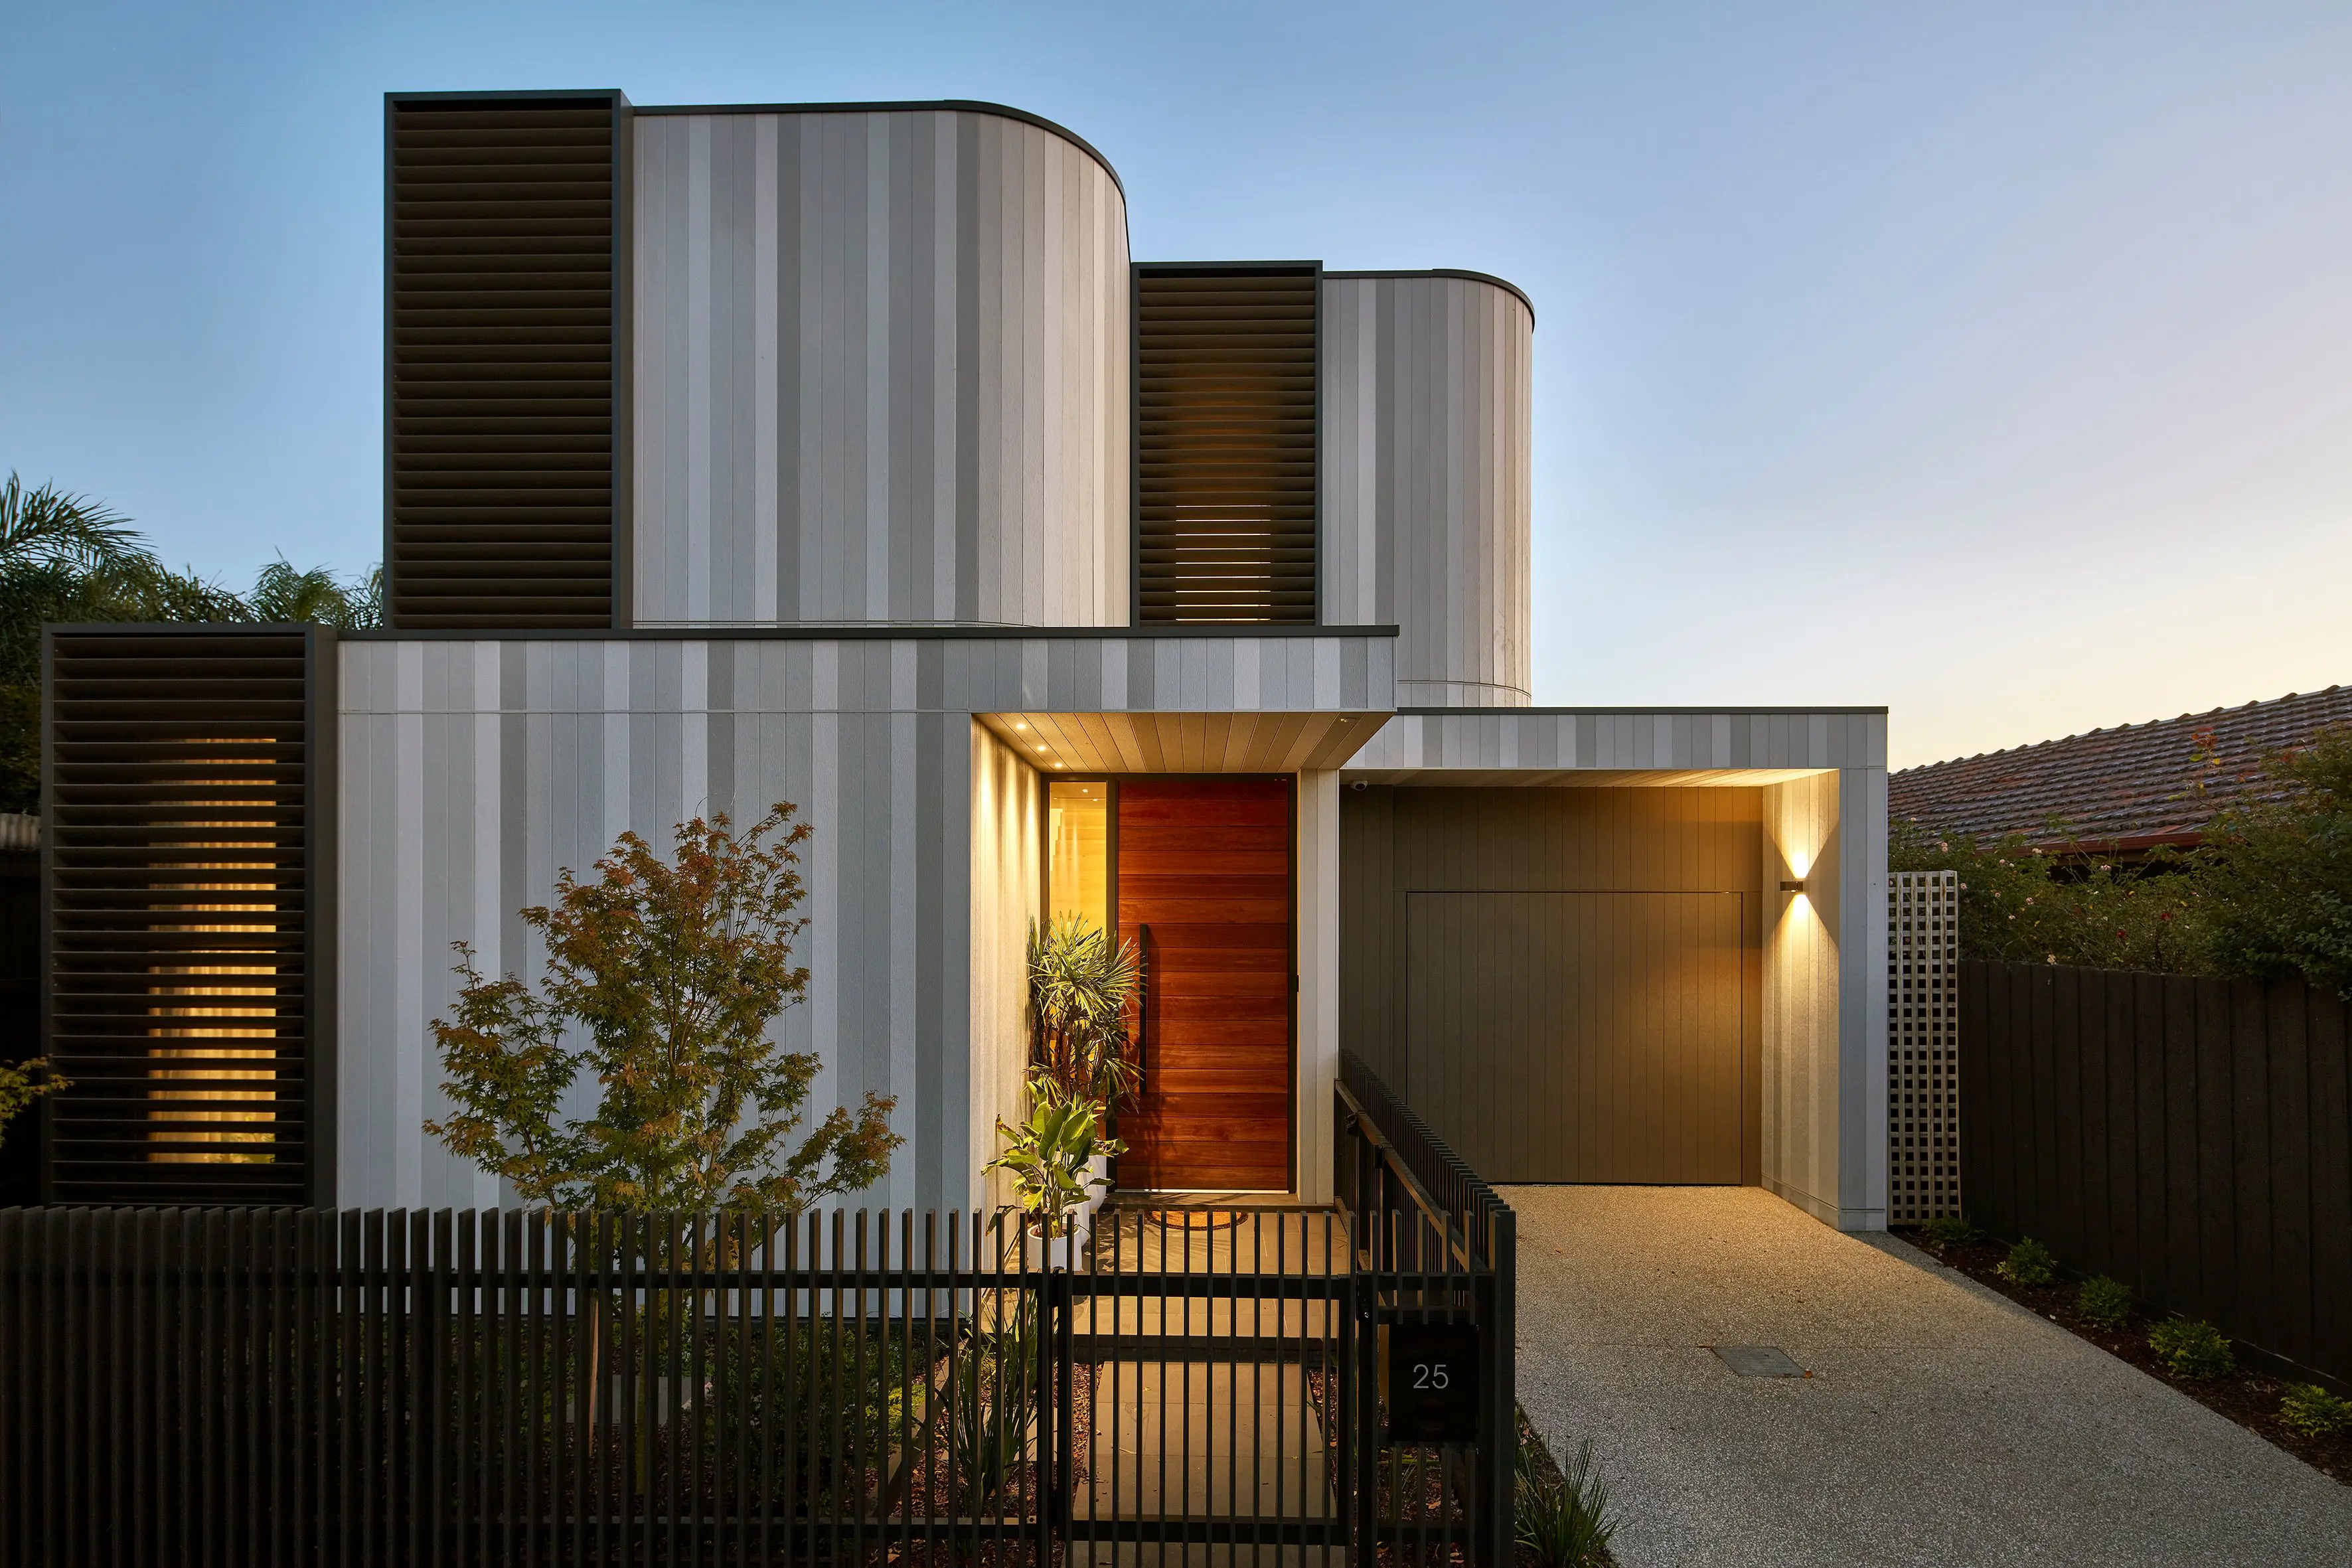 Curved double storey brown and aluminum house with timber door